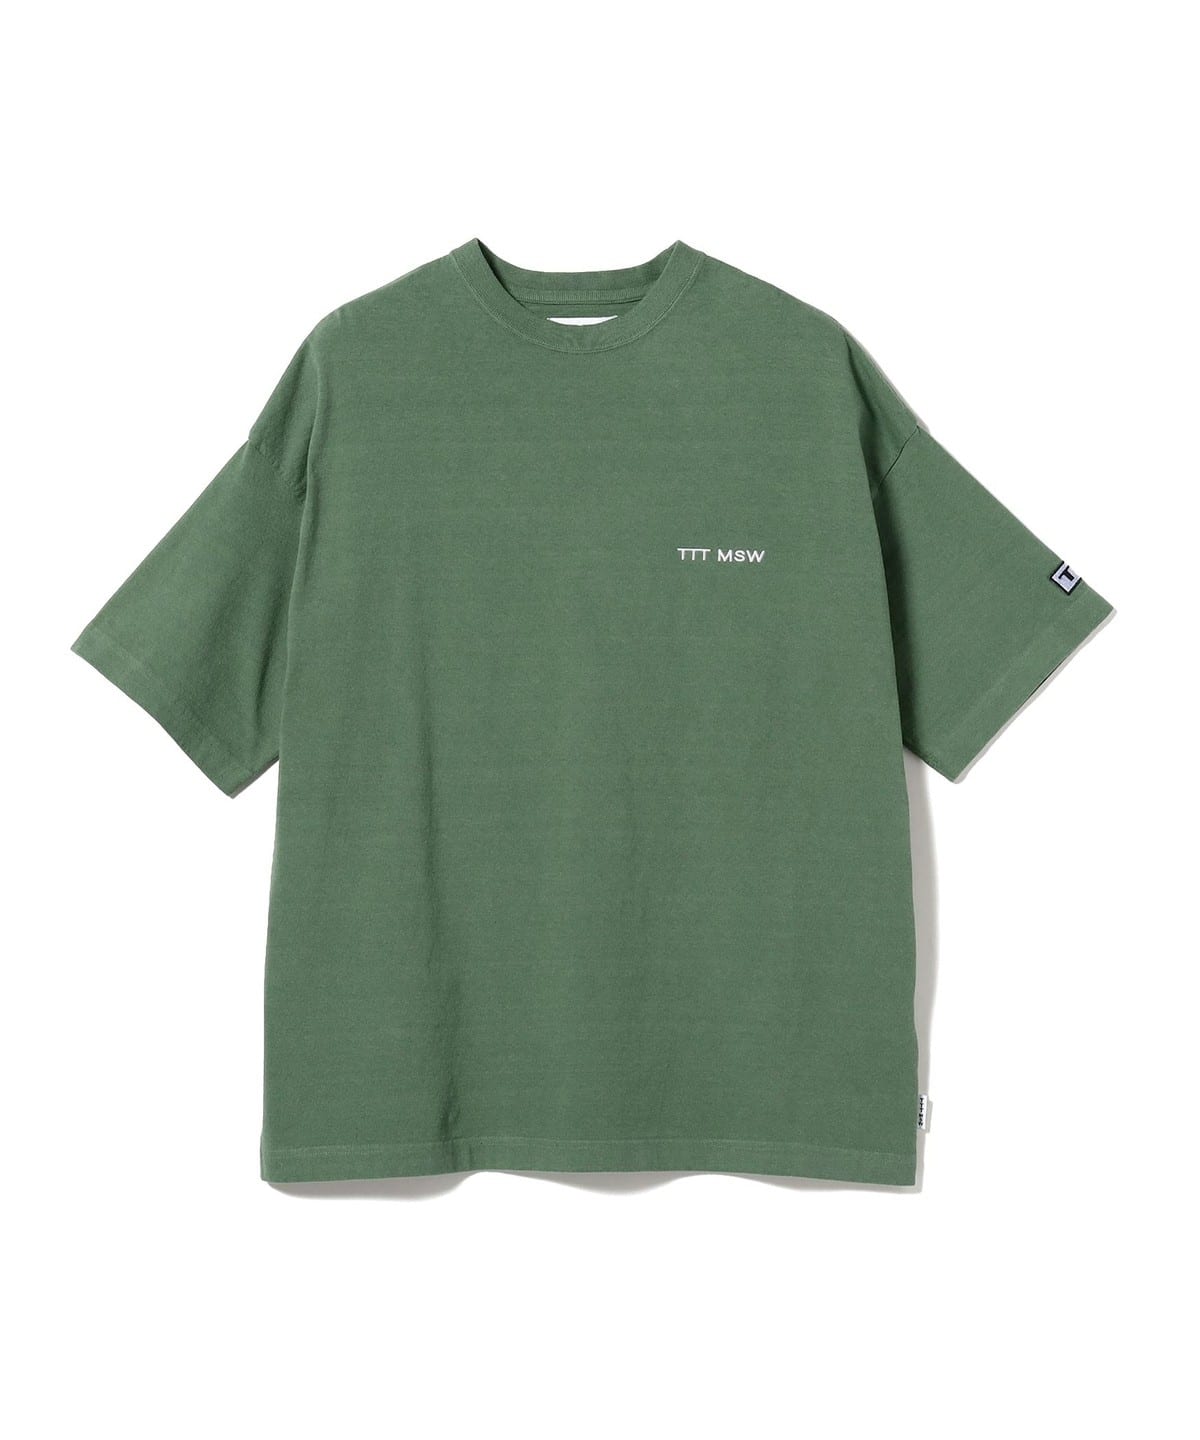 BEAMS（ビームス）TTTMSW / Mountain Tee（Tシャツ・カットソー T ...